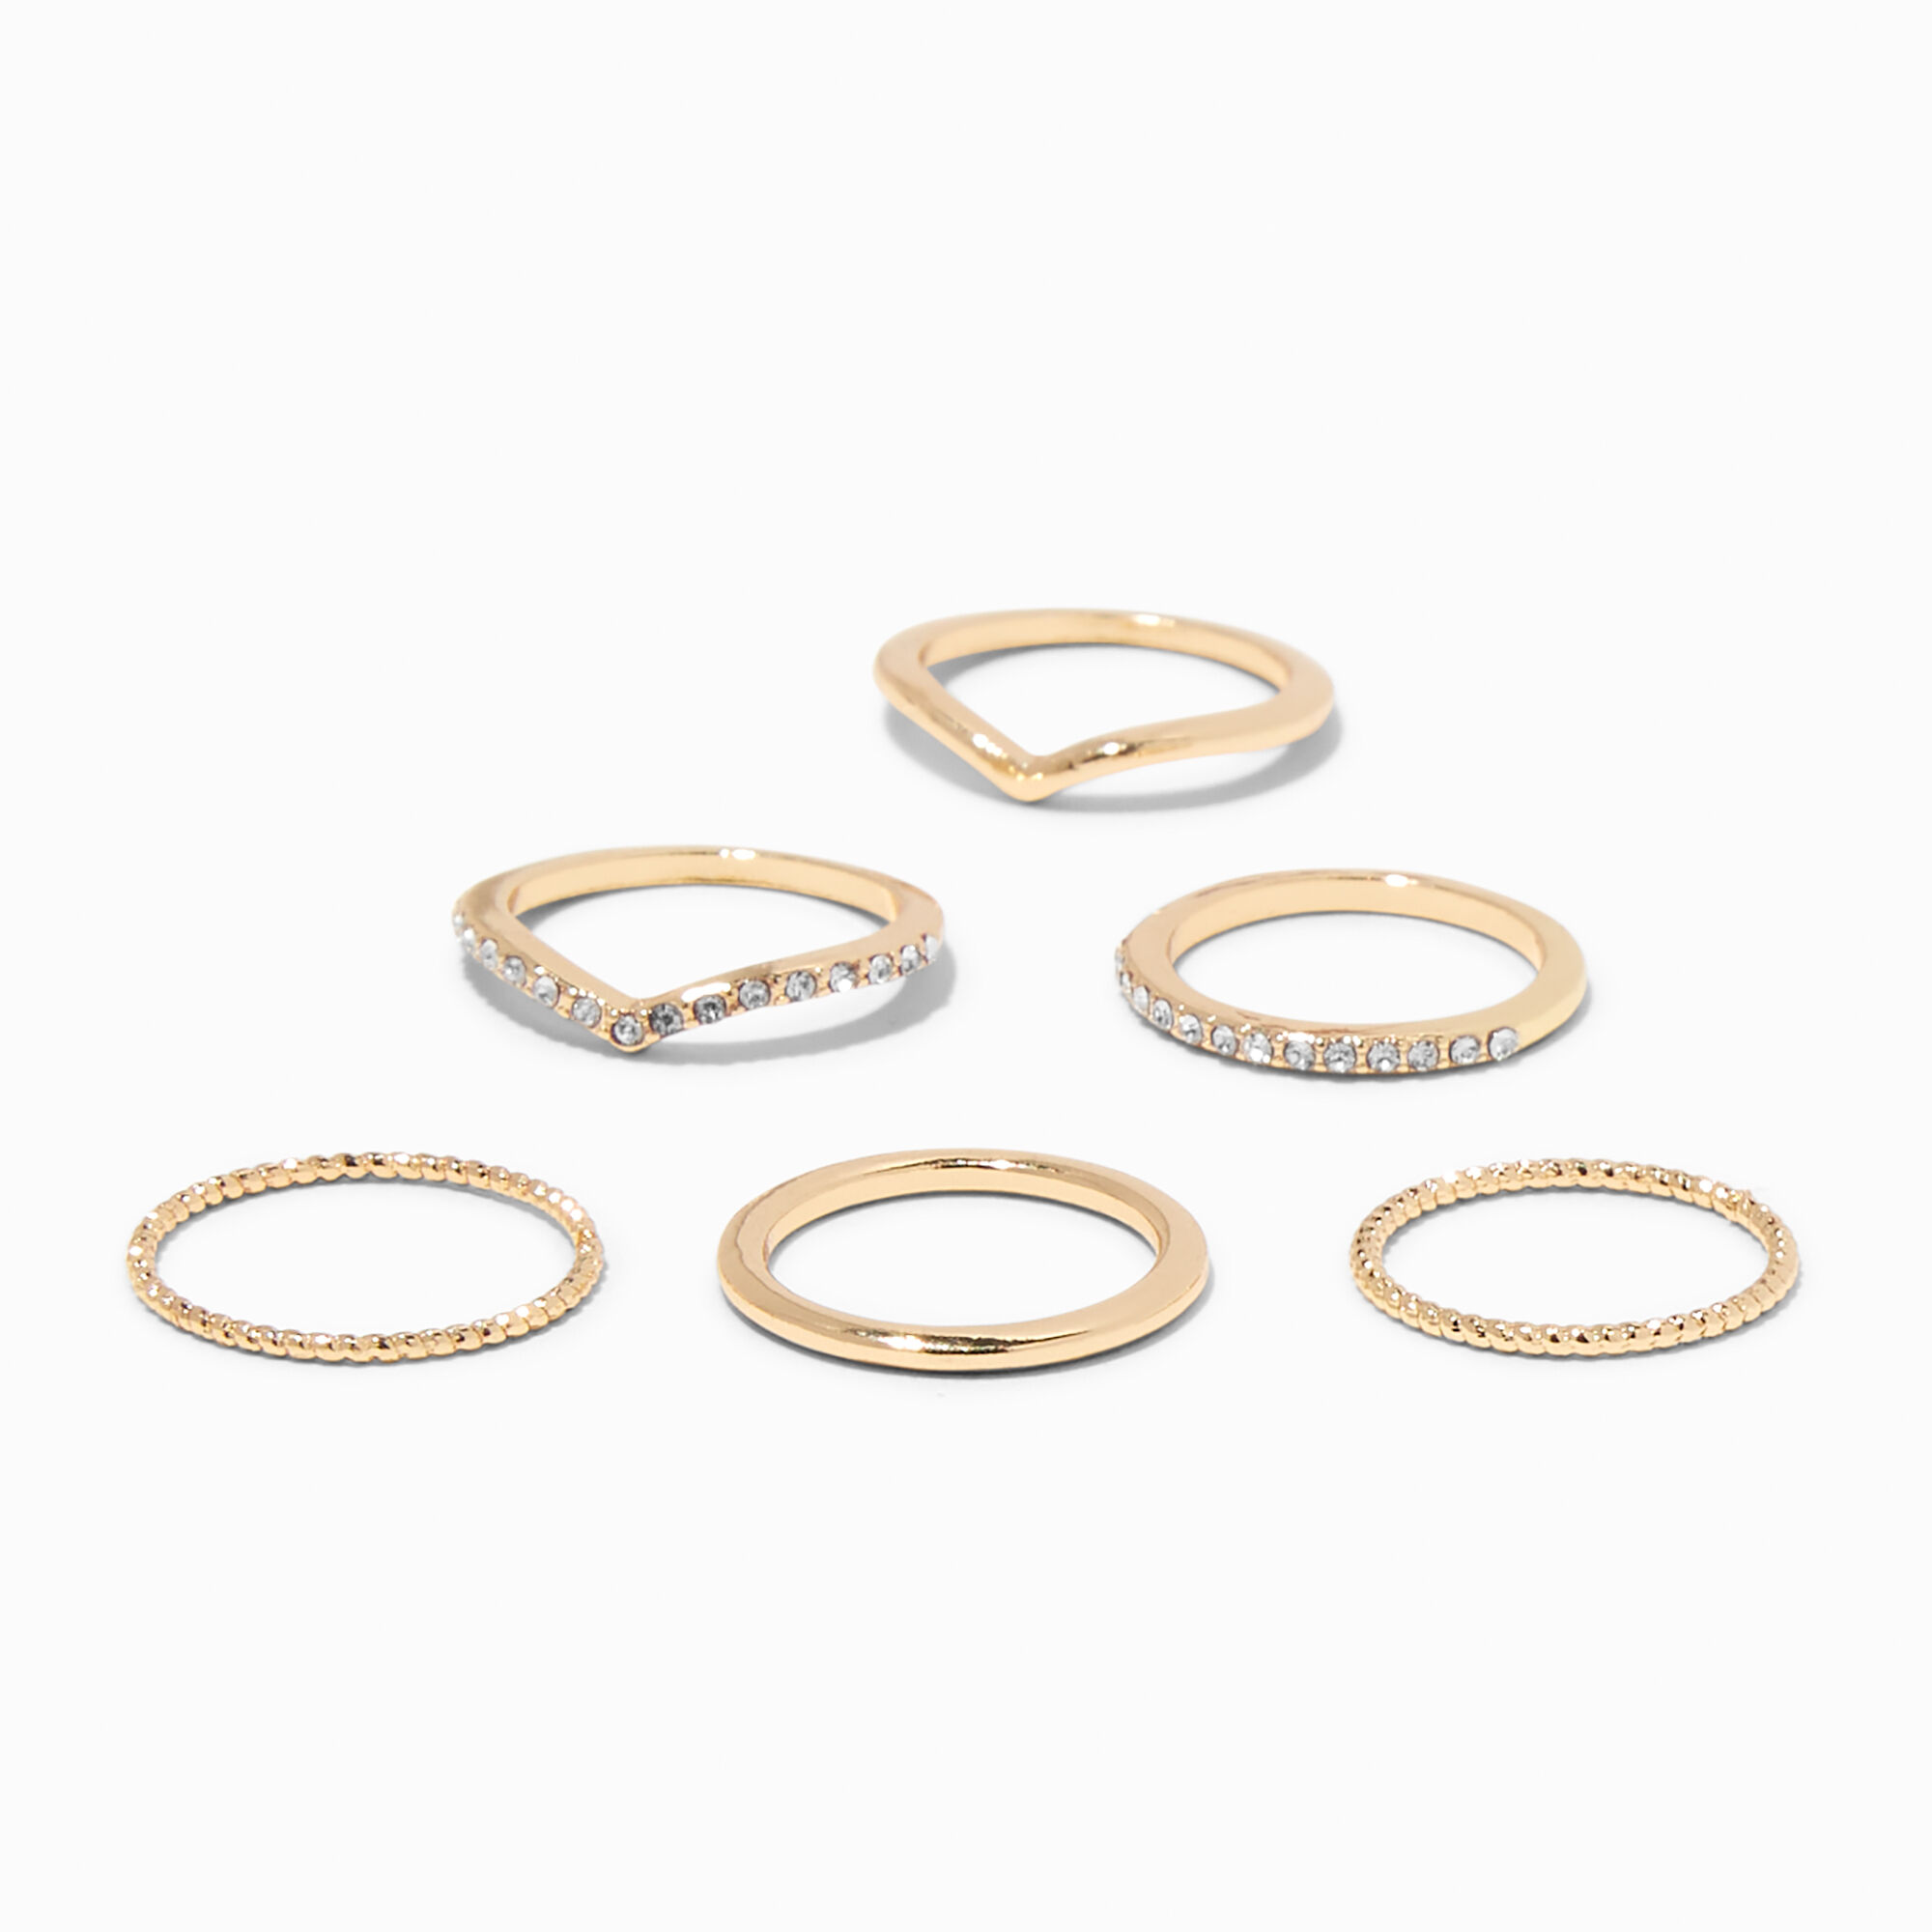 View Claires Delicate Geometric Rings 6 Pack Gold information